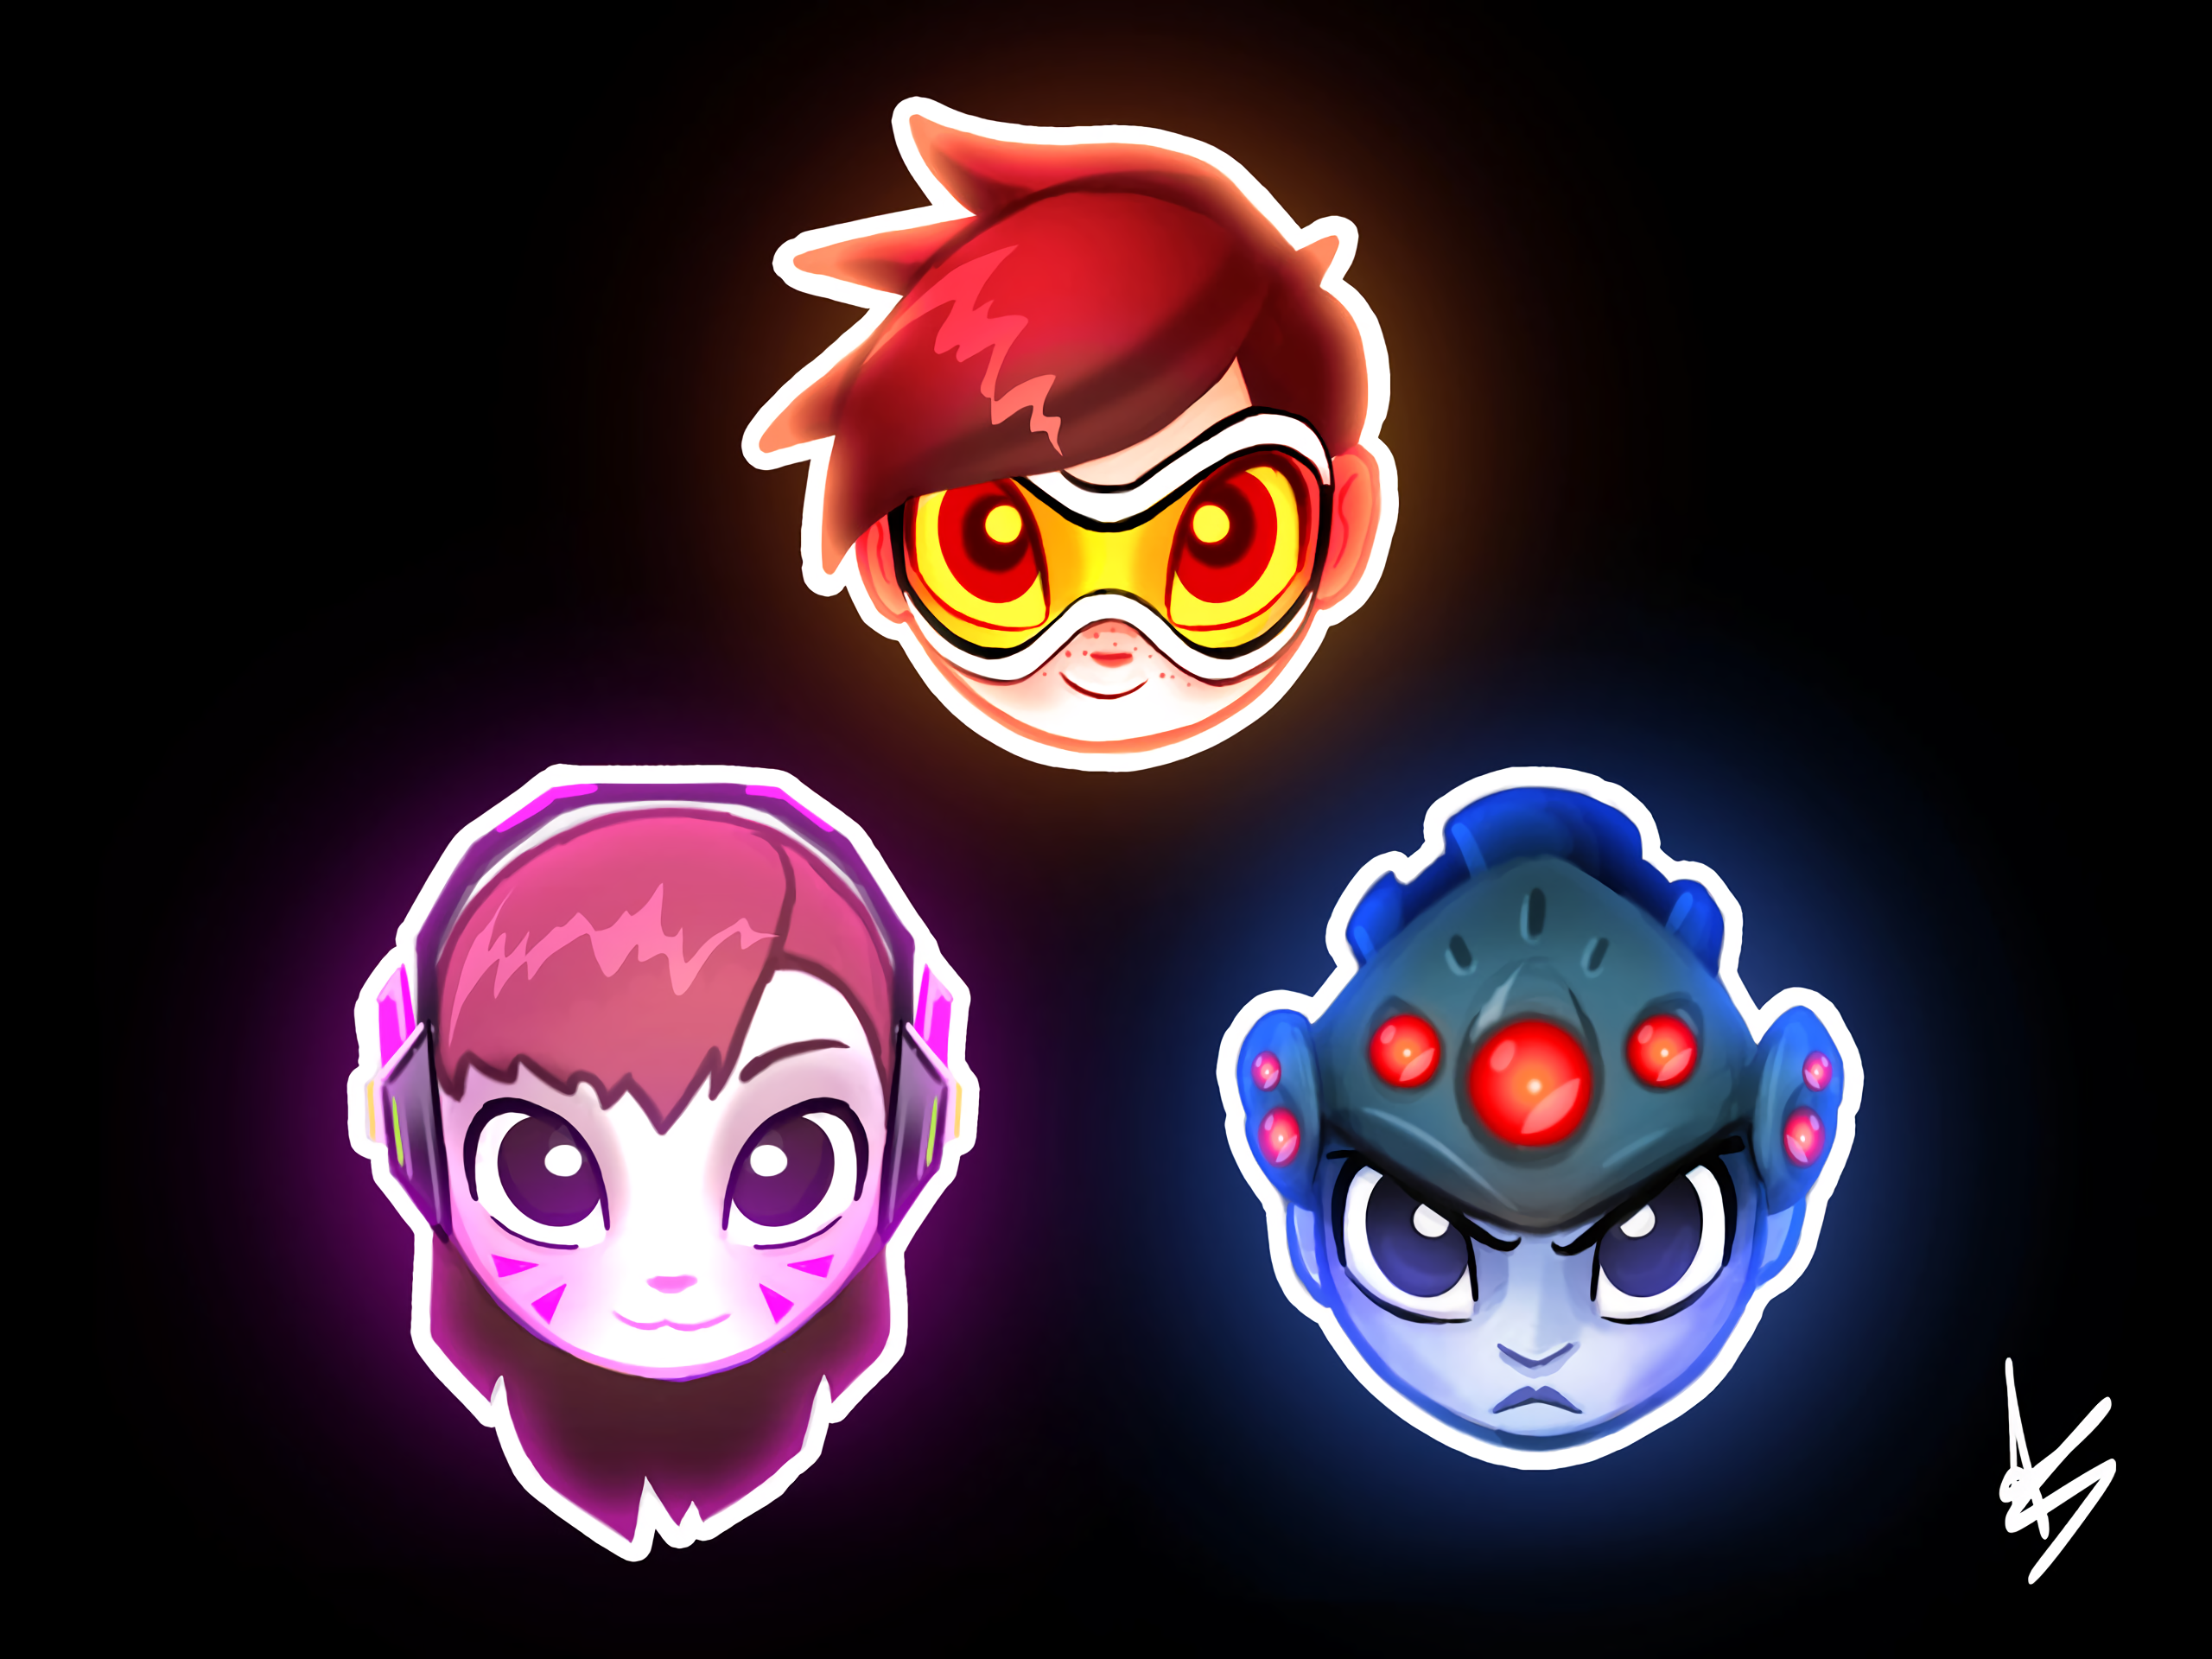 General 2560x1920 Overwatch Blizzard Entertainment Tracer (Overwatch) D.Va (Overwatch) Widowmaker (Overwatch) video game characters PC gaming dark background face simple background